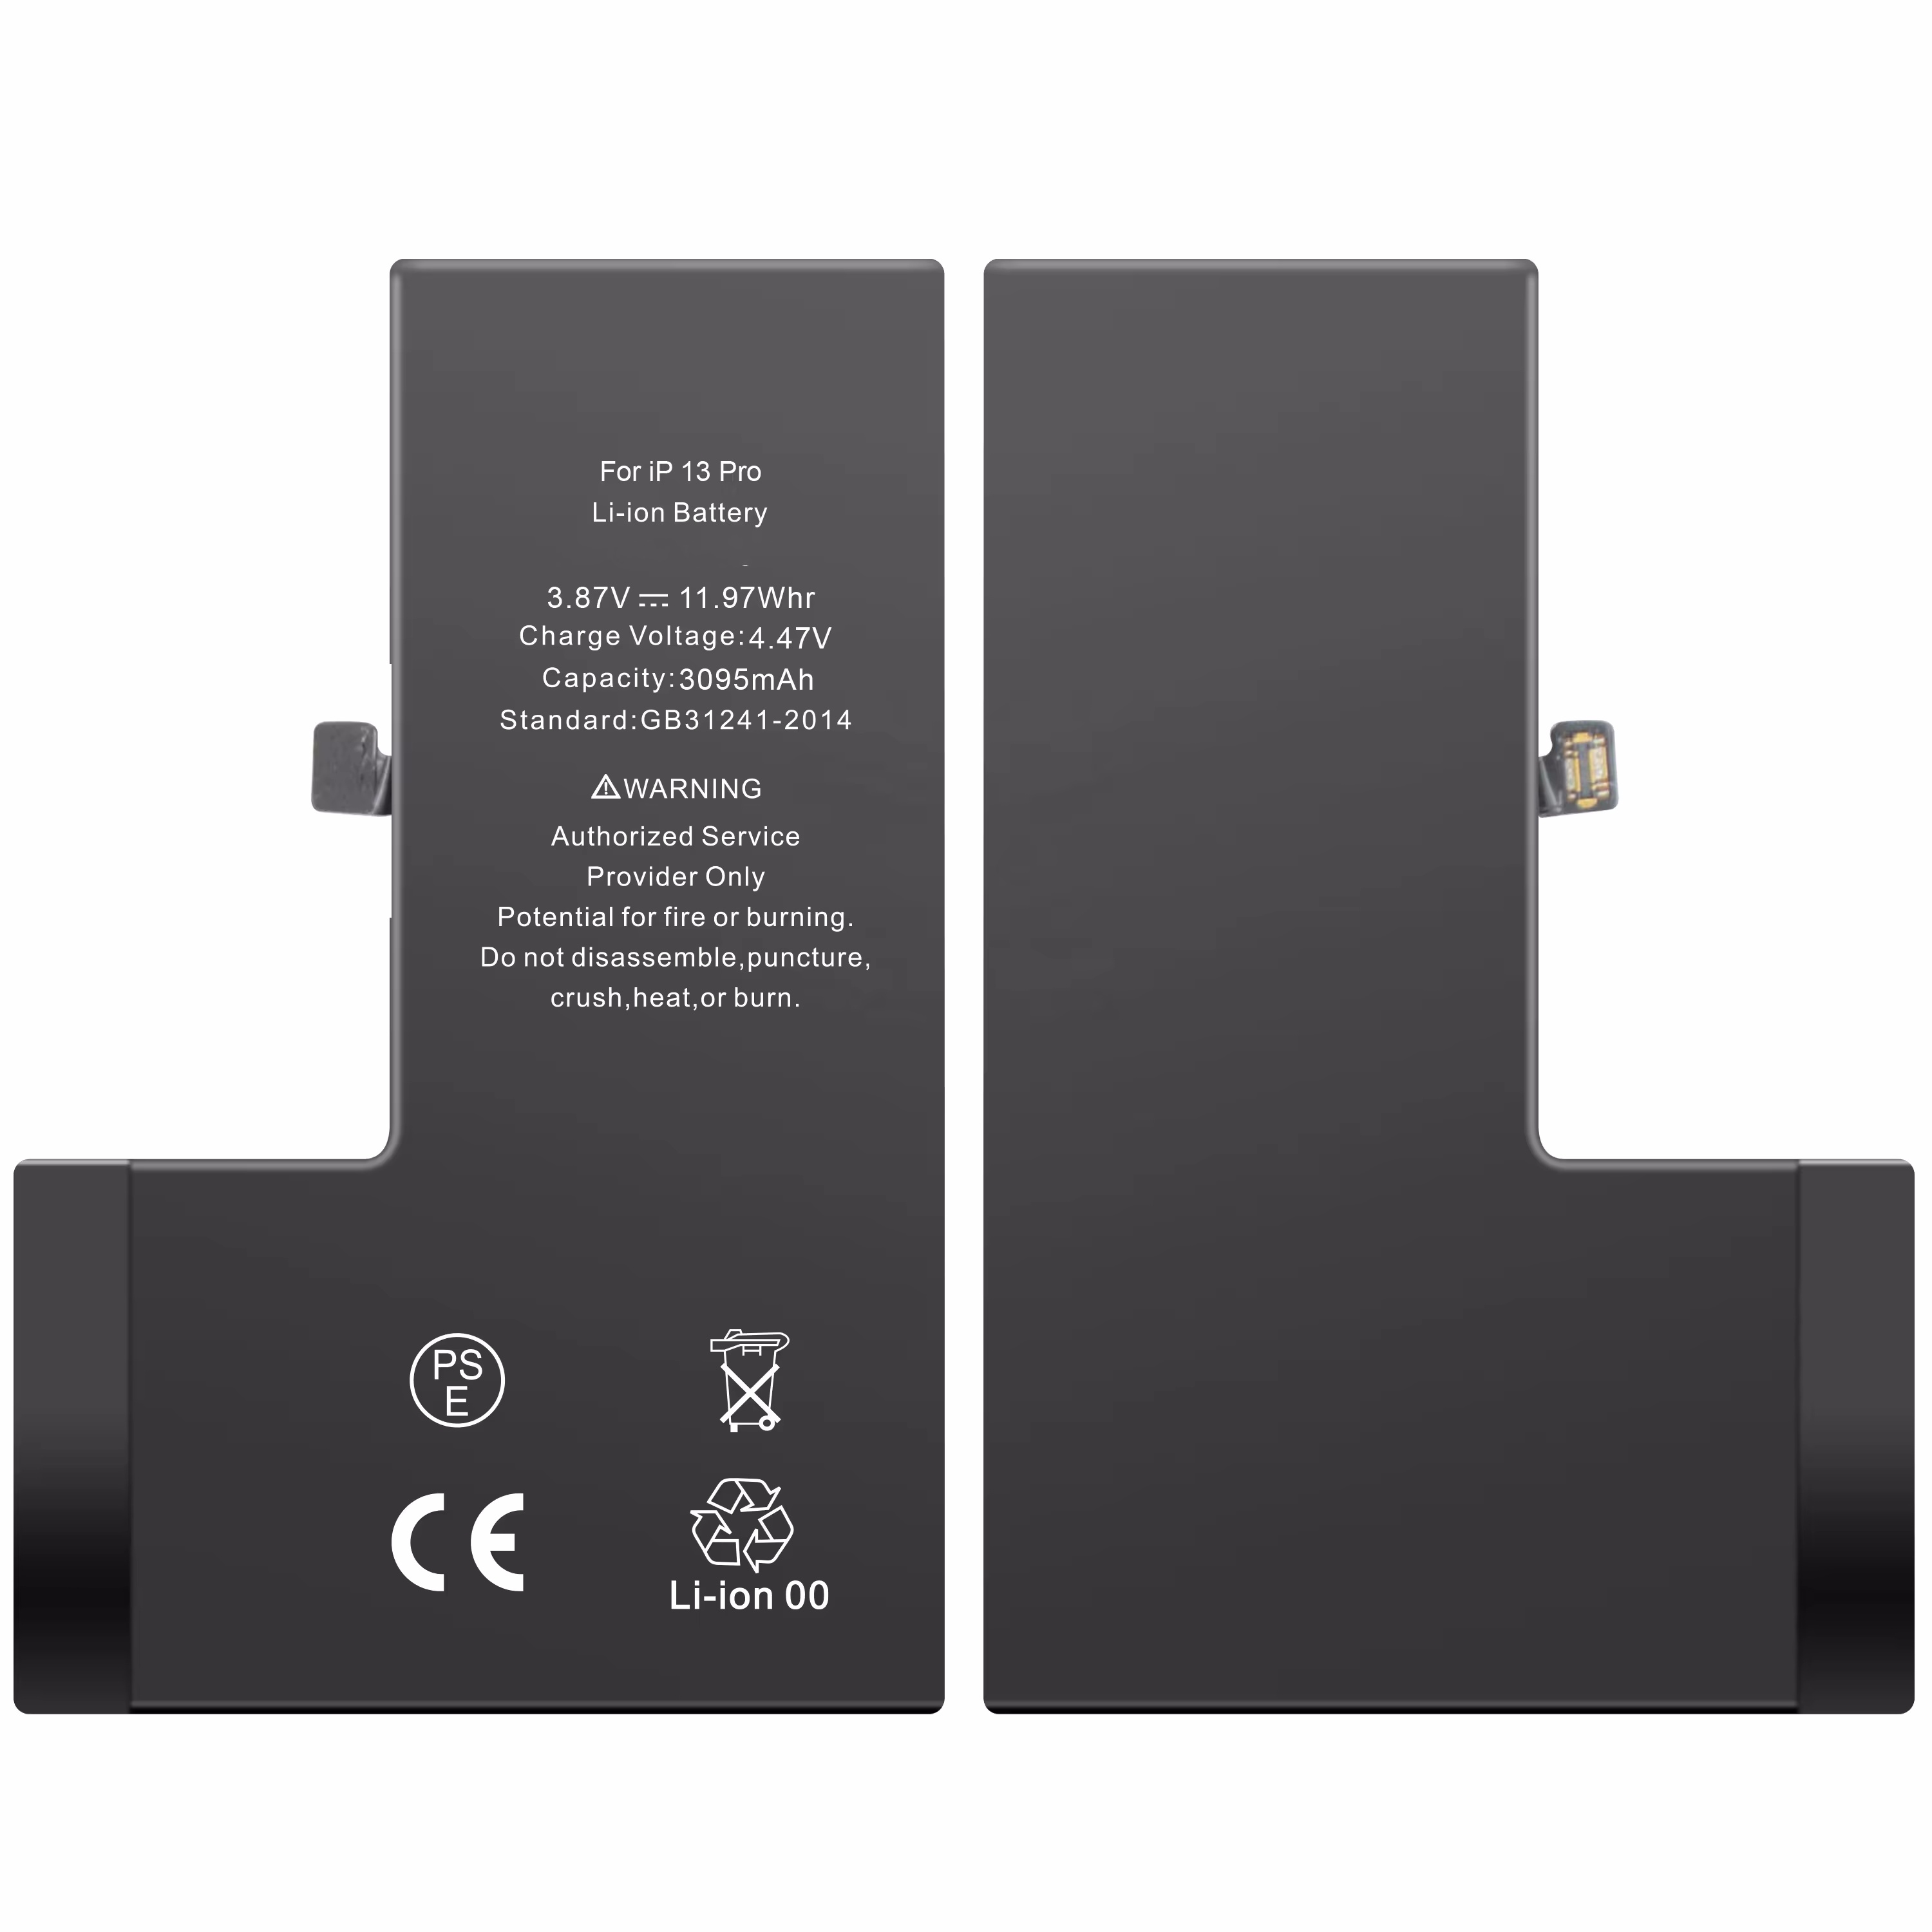 Iphone 13 Pro battery